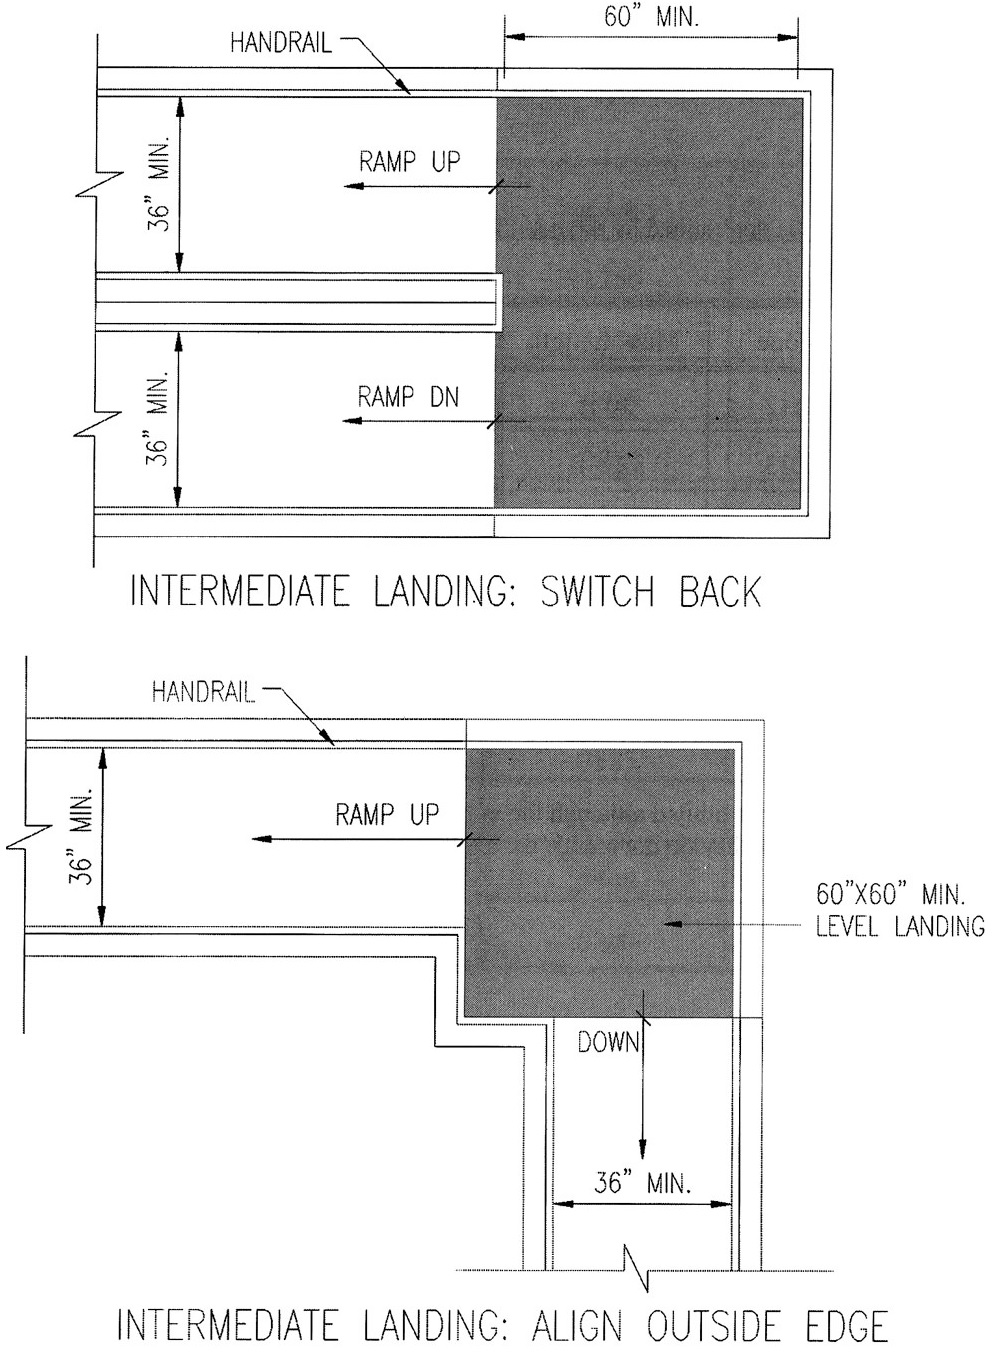 Plan Diagram showing intermediate landings at a switchback ramp and a ramp that aligns with the outside edge